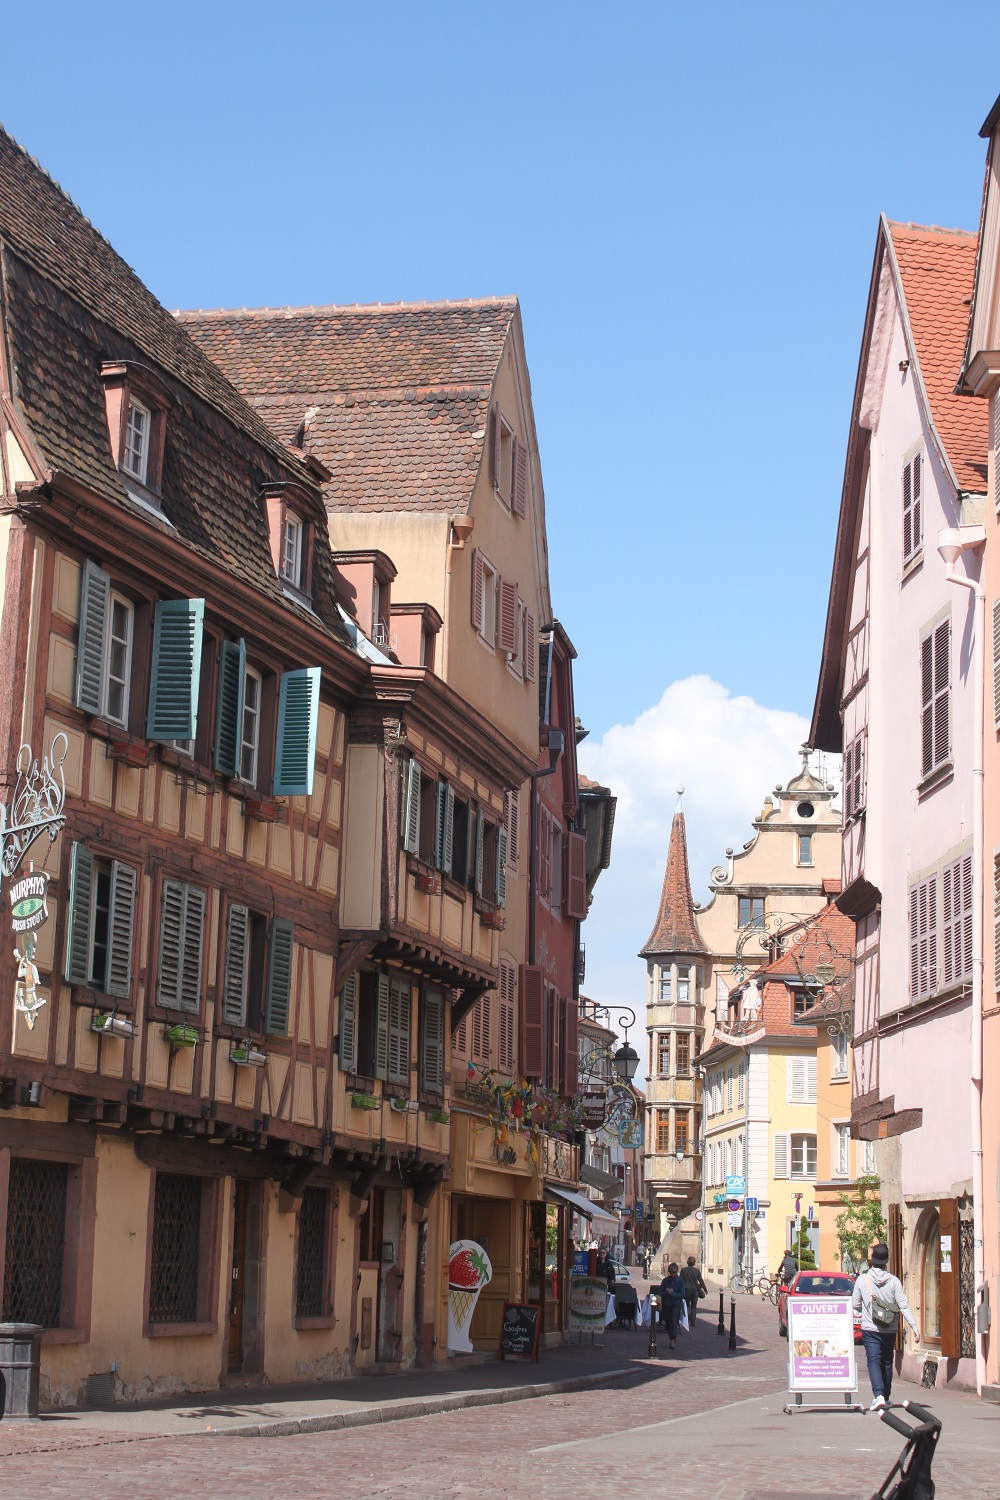 The Streets of Colmar